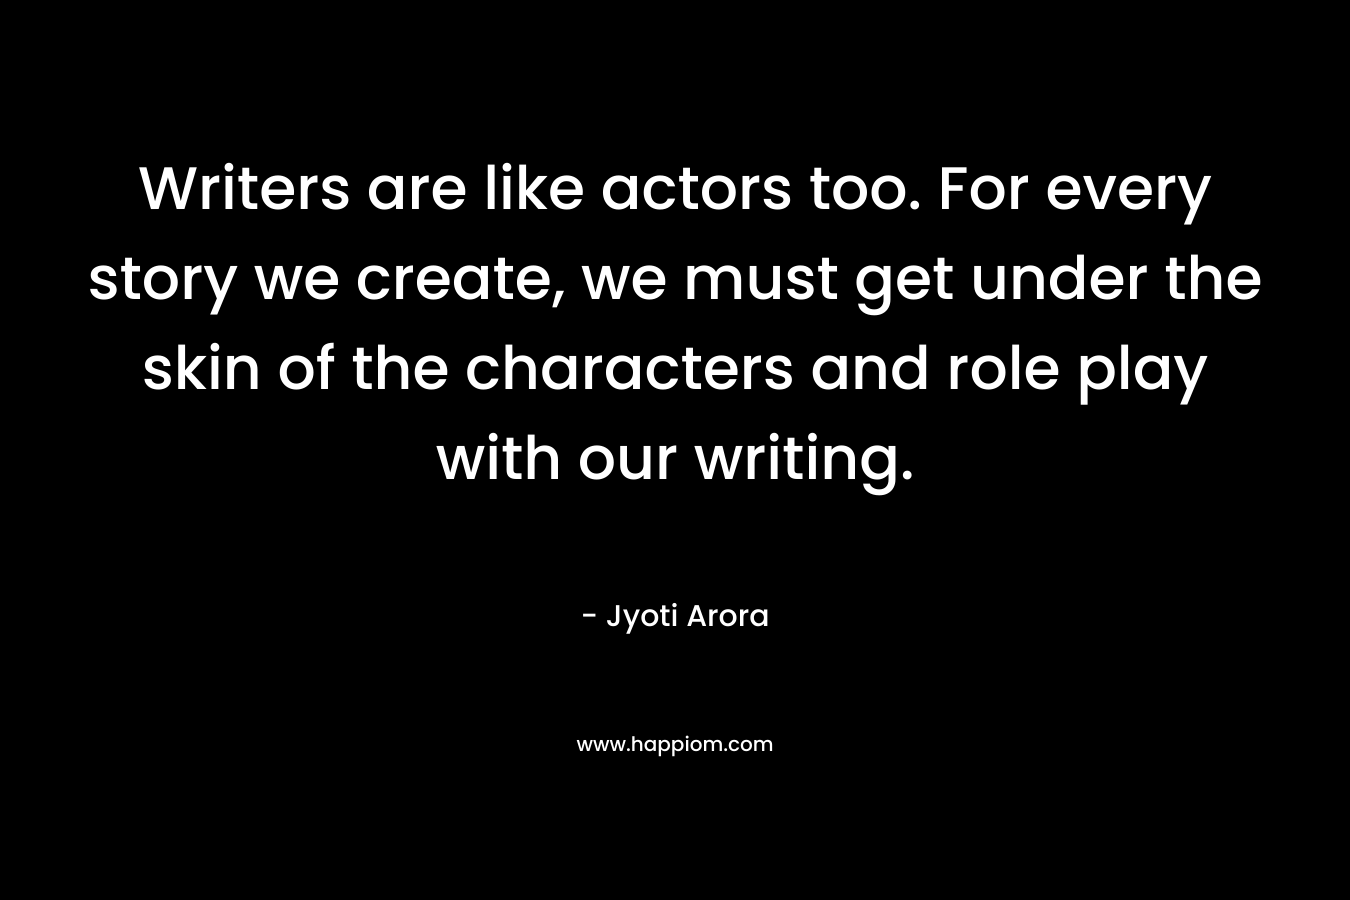 Writers are like actors too. For every story we create, we must get under the skin of the characters and role play with our writing. – Jyoti Arora